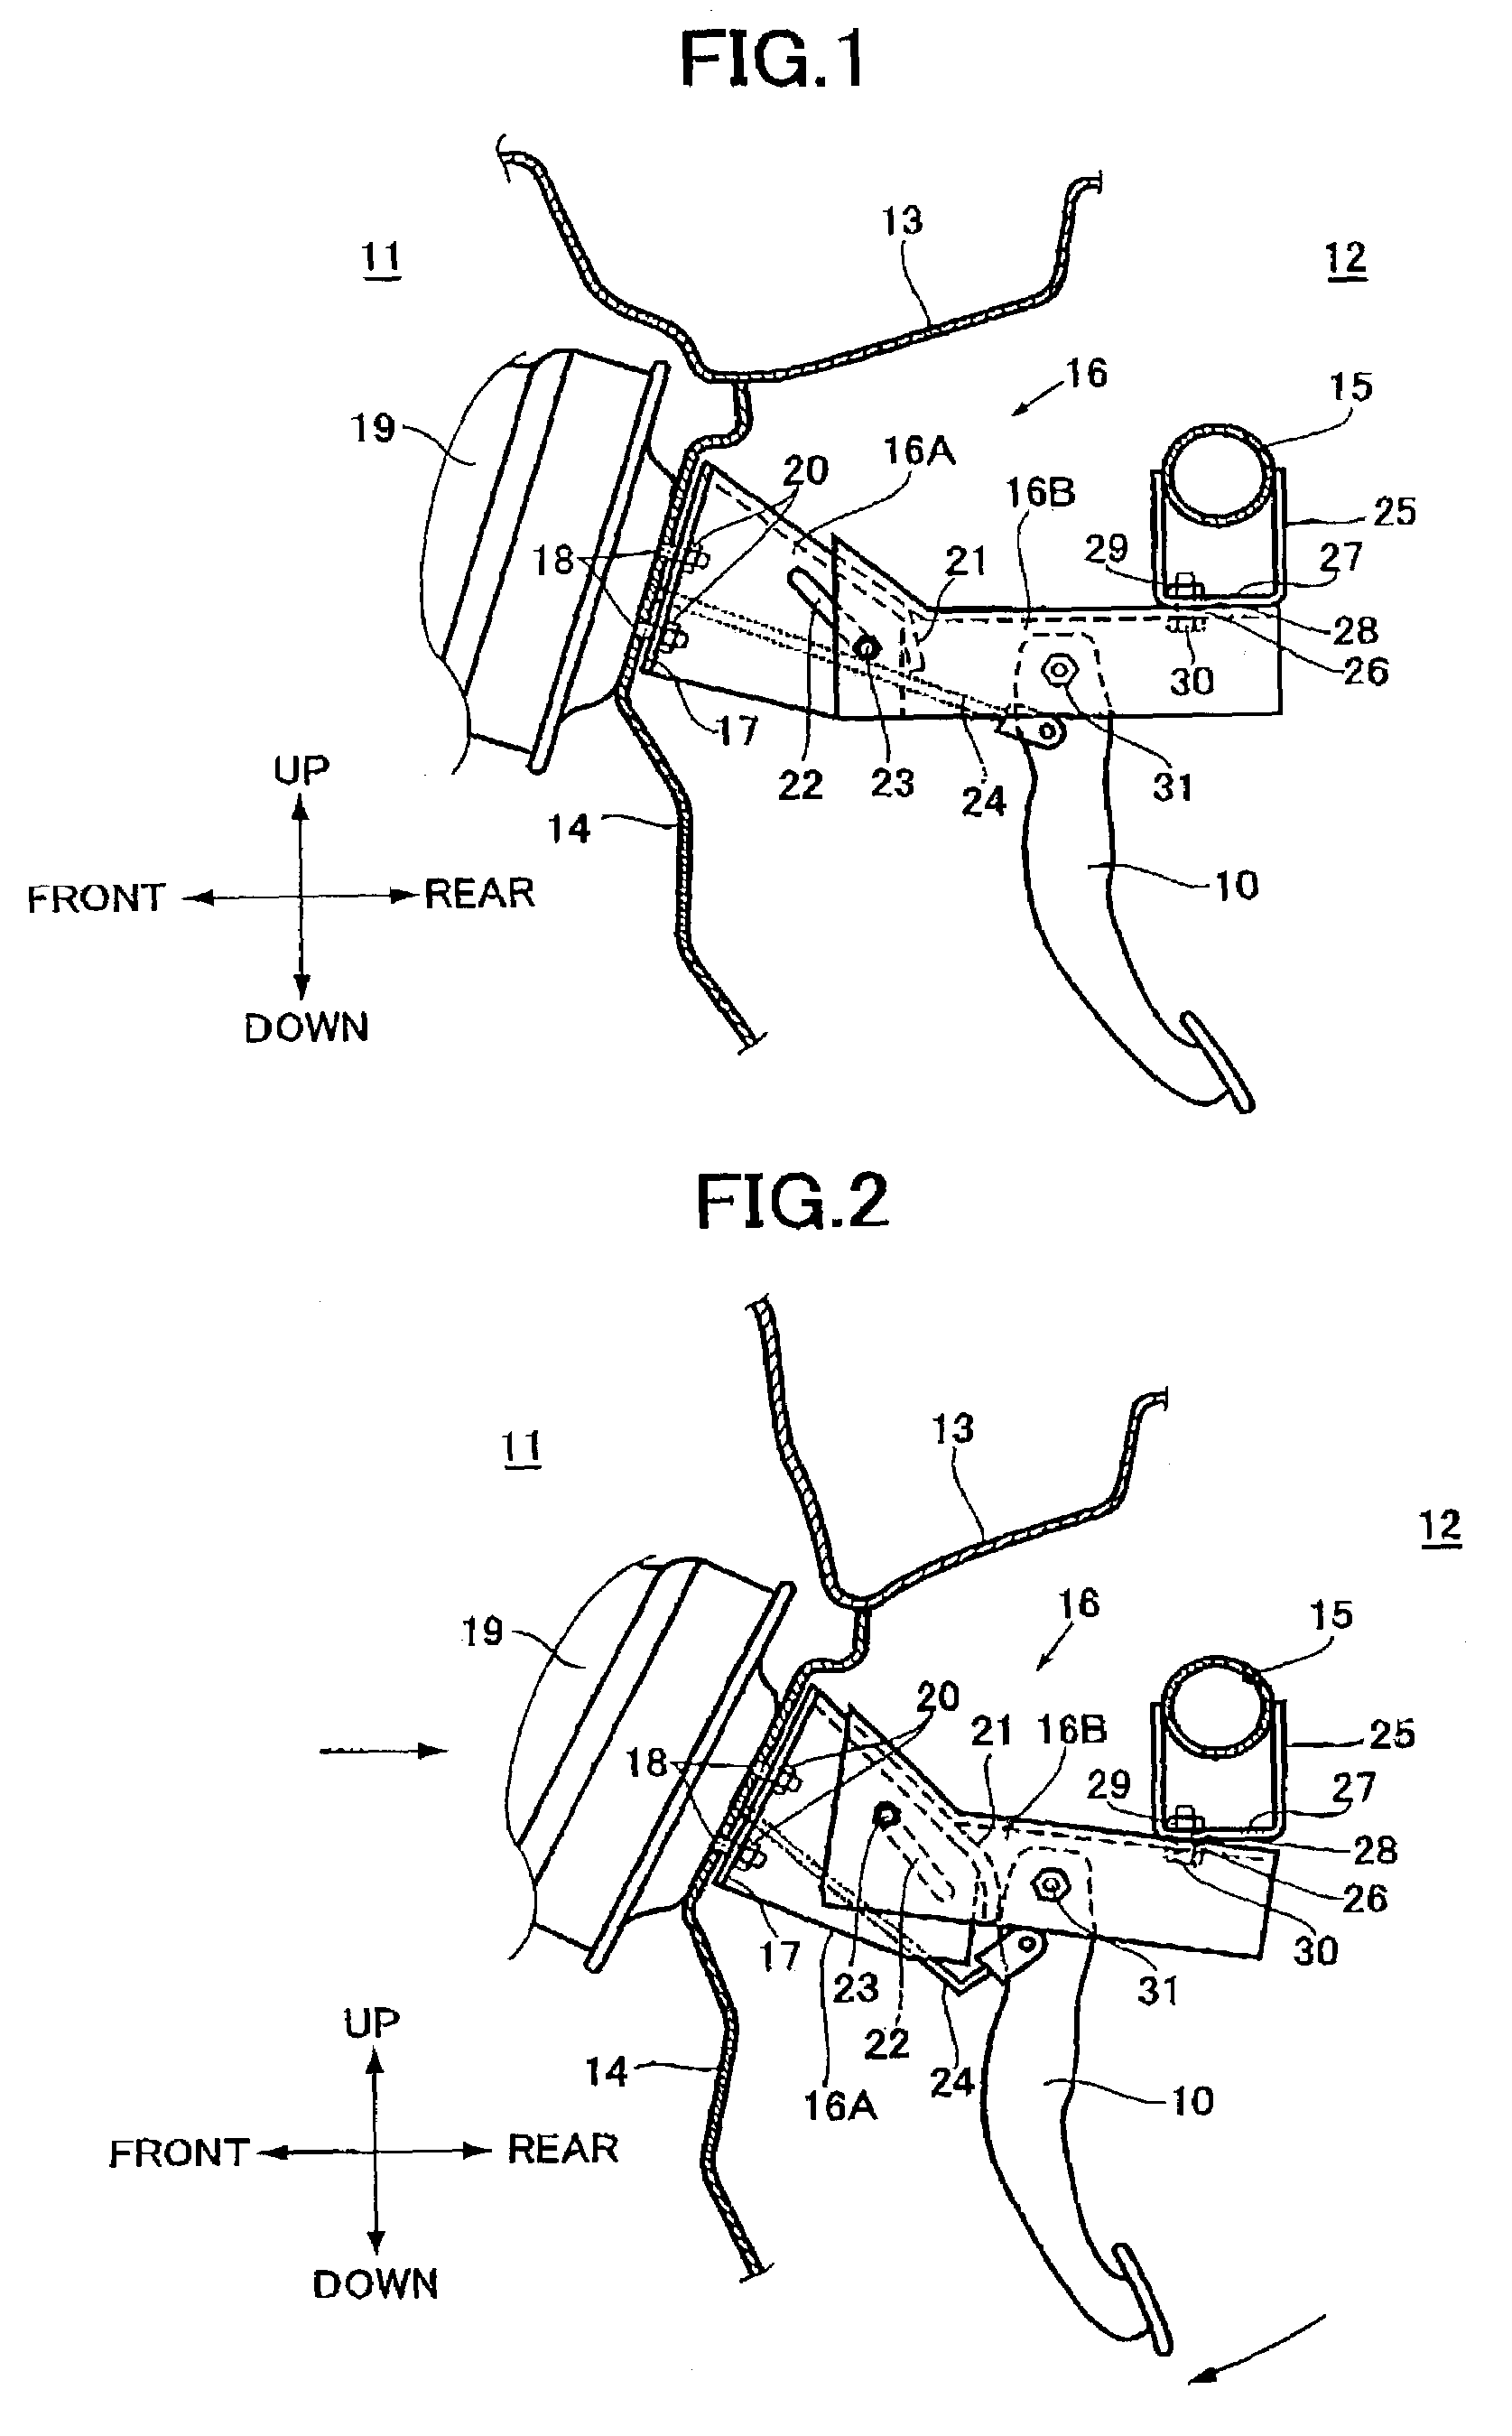 Pedal support structure for a vehicle